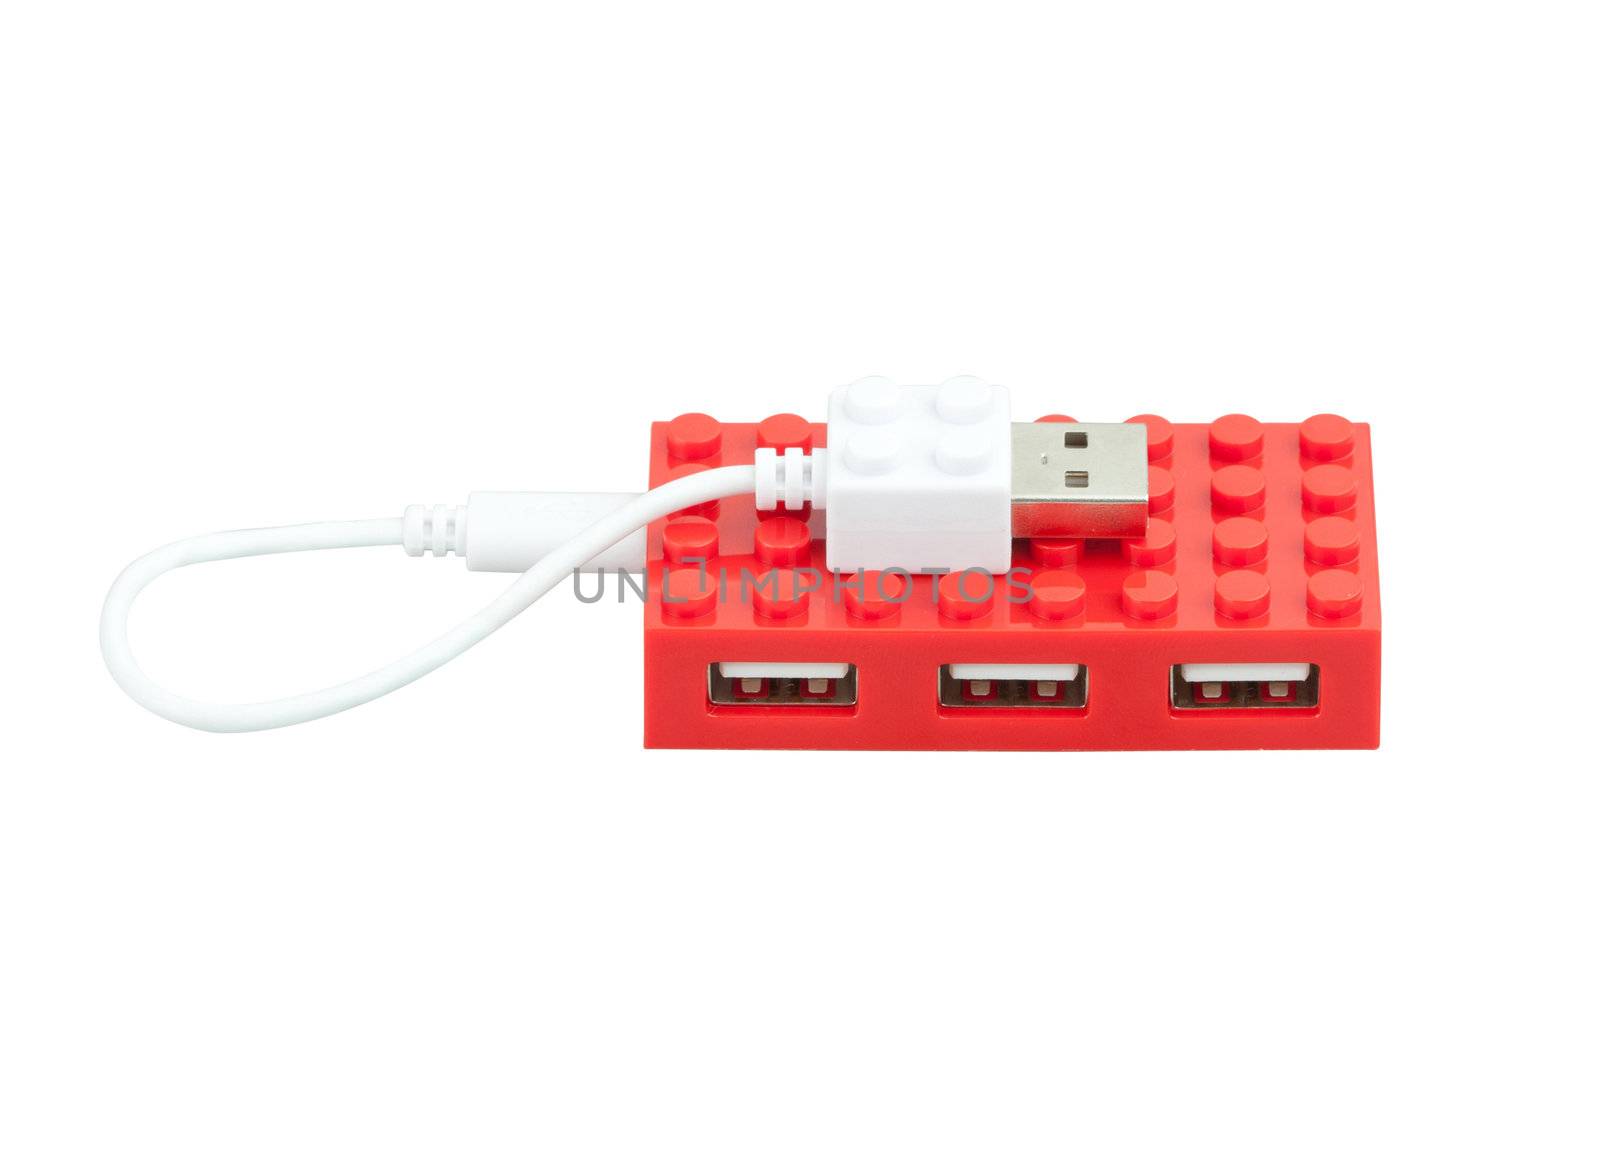 cute design of the USB hubs isolated on white by john_kasawa